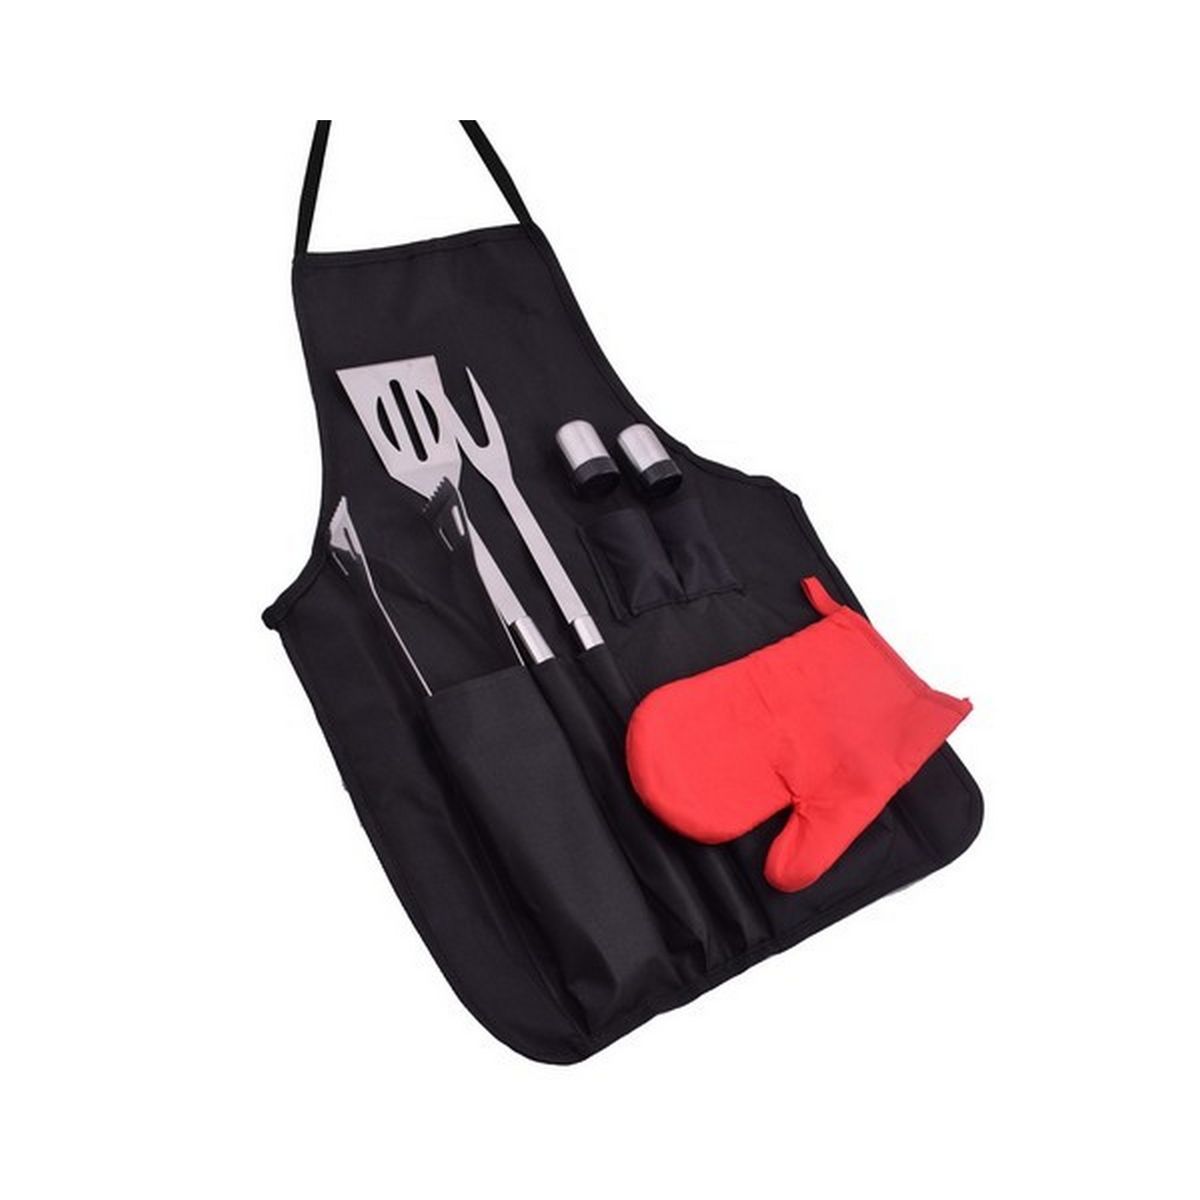 Marco Stainless Steel Braai Apron | Shop Today. Get it Tomorrow ...